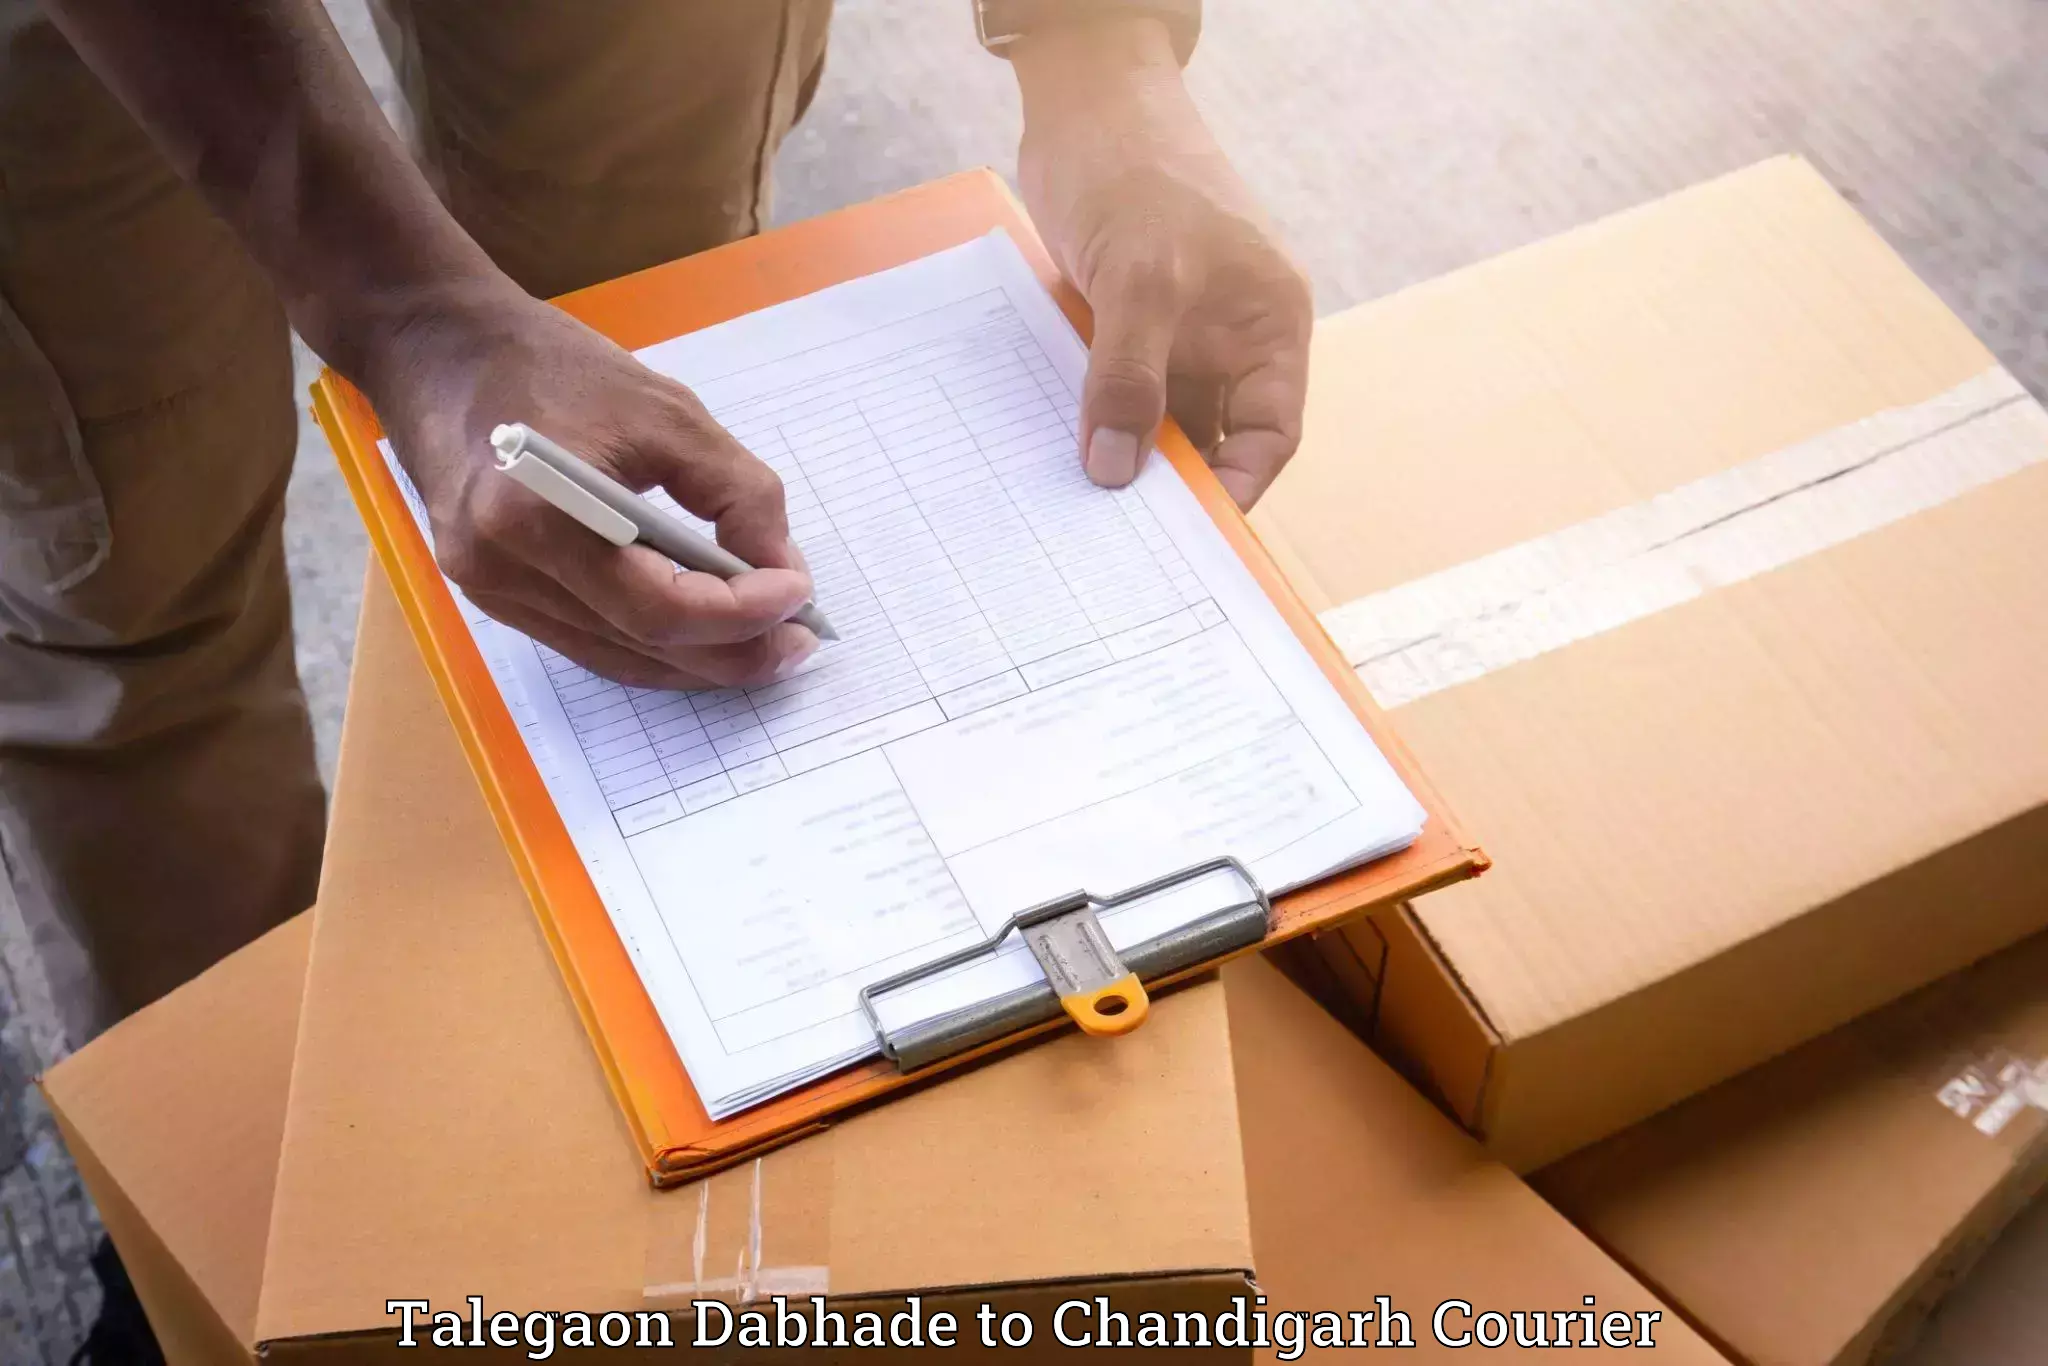 Moving and storage services Talegaon Dabhade to Chandigarh